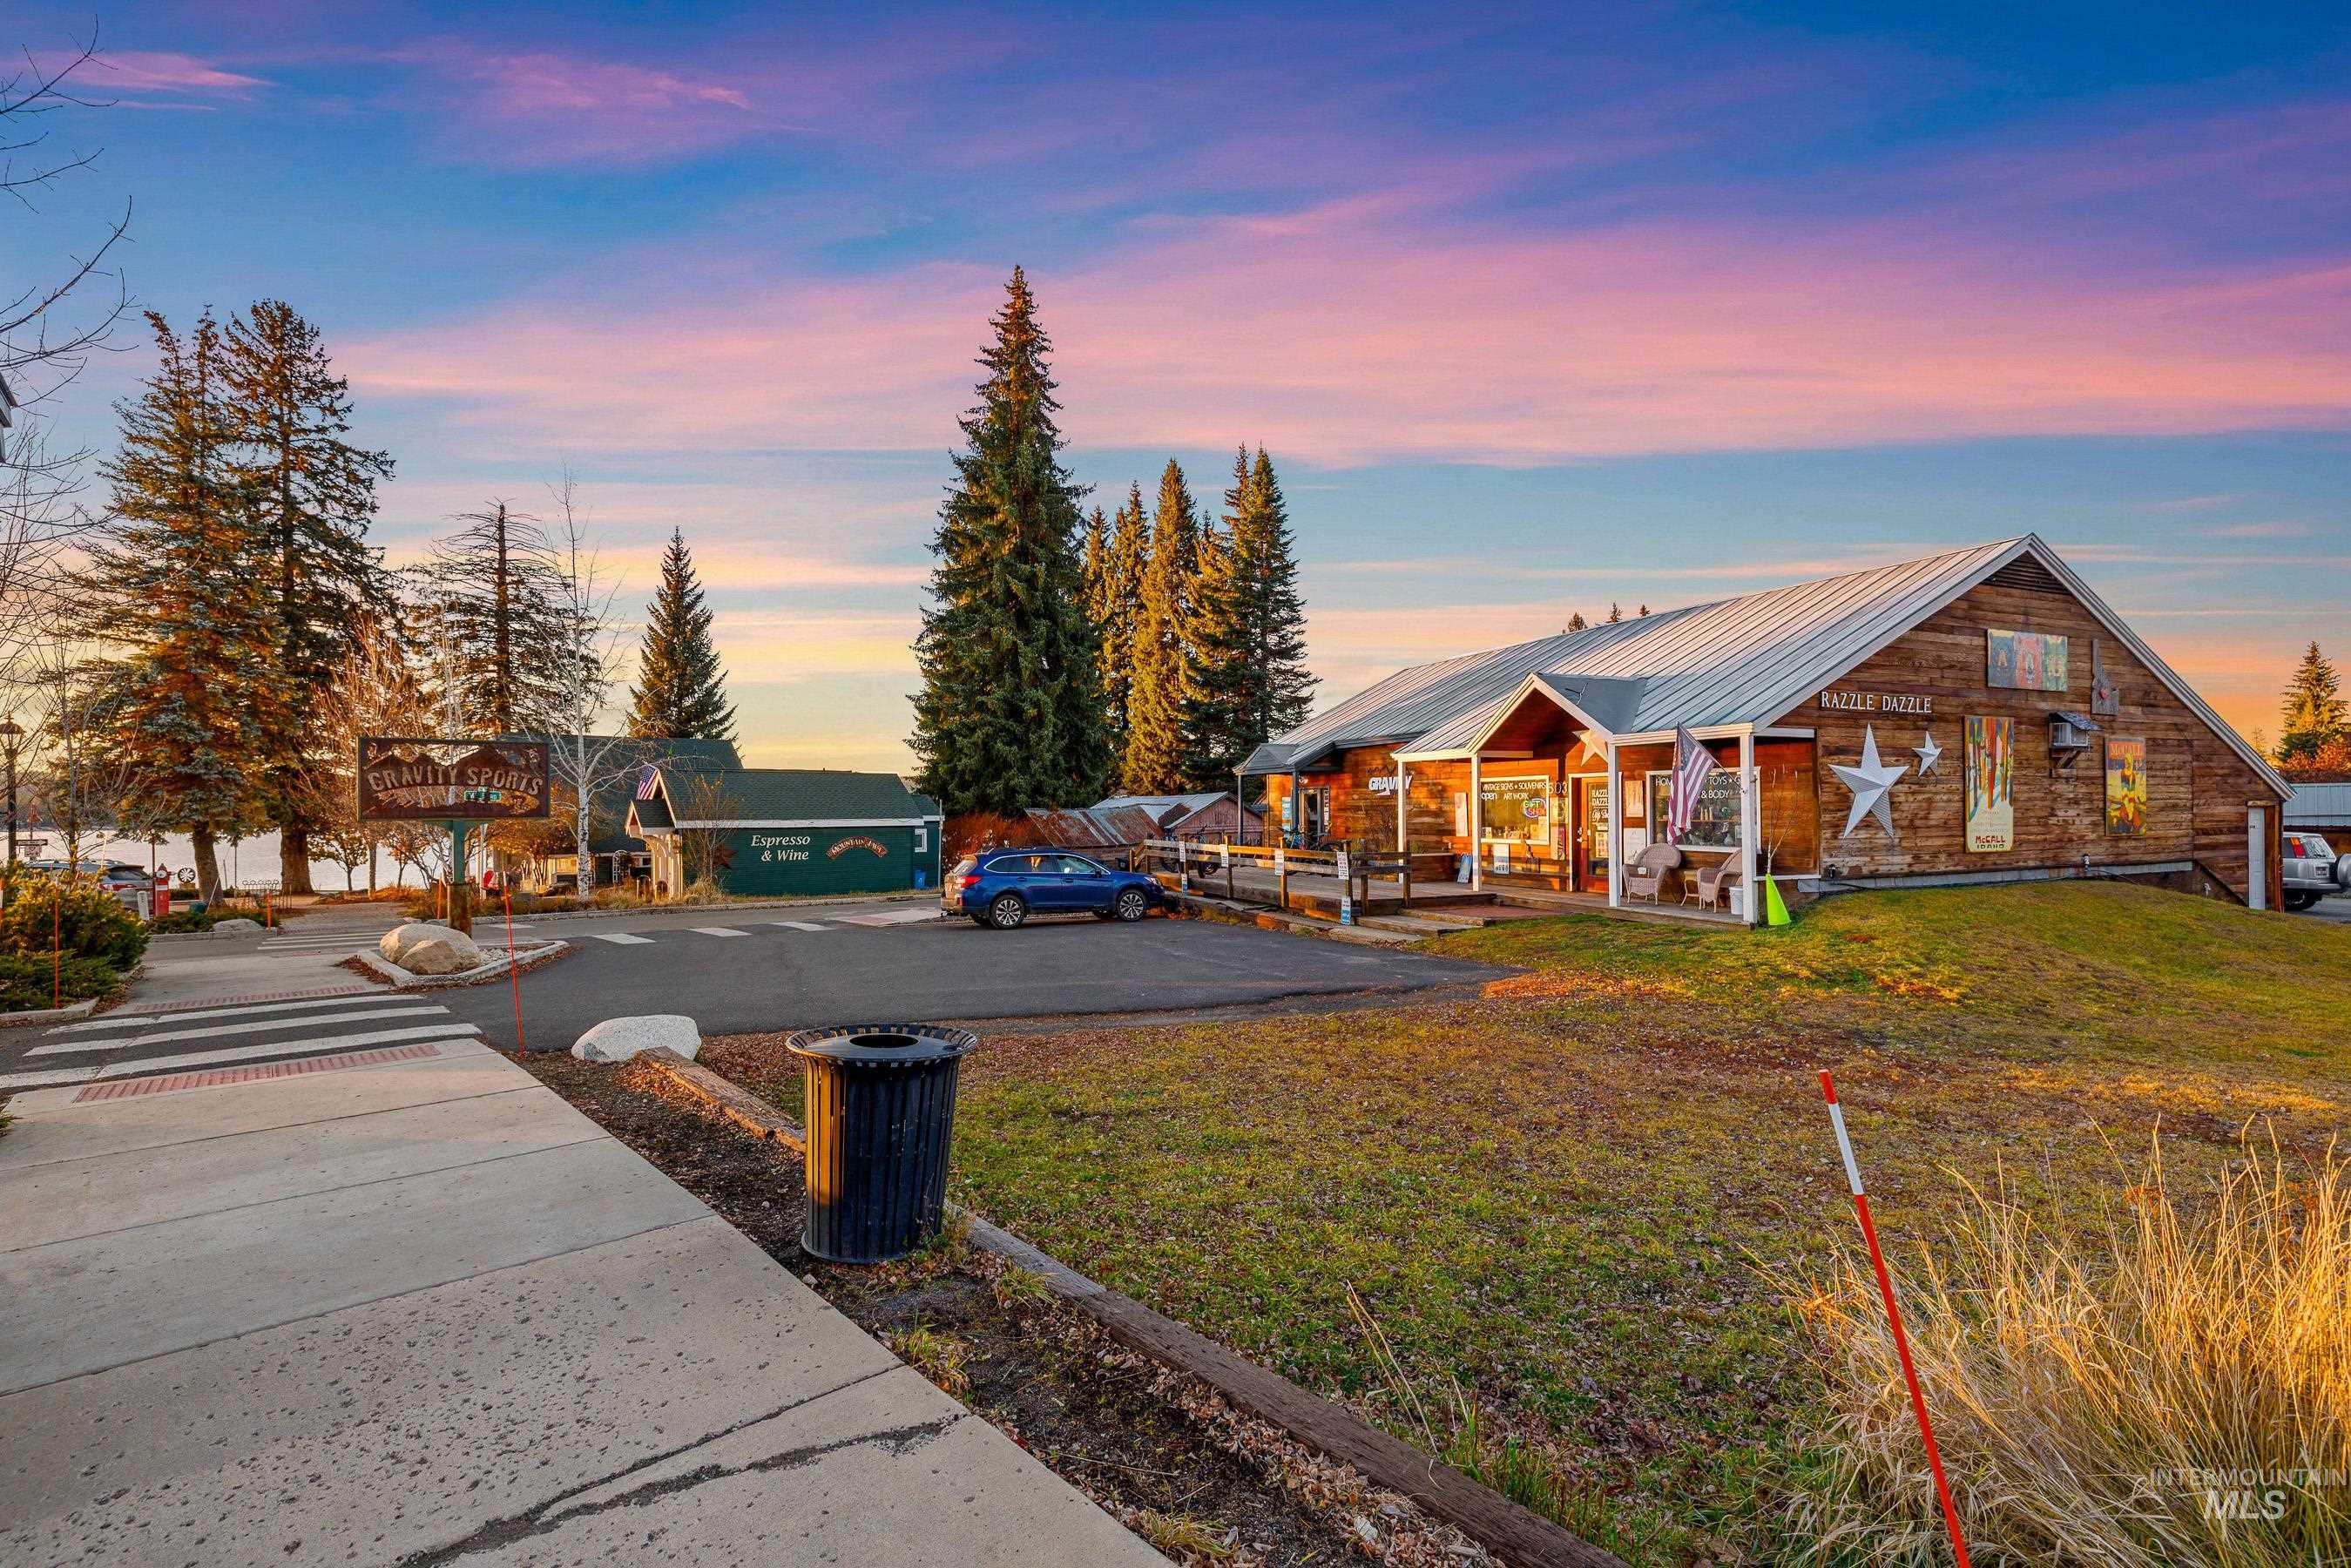 503 Pine Street, McCall, Idaho 83638, Business/Commercial For Sale, Price $1,650,000,MLS 98916089